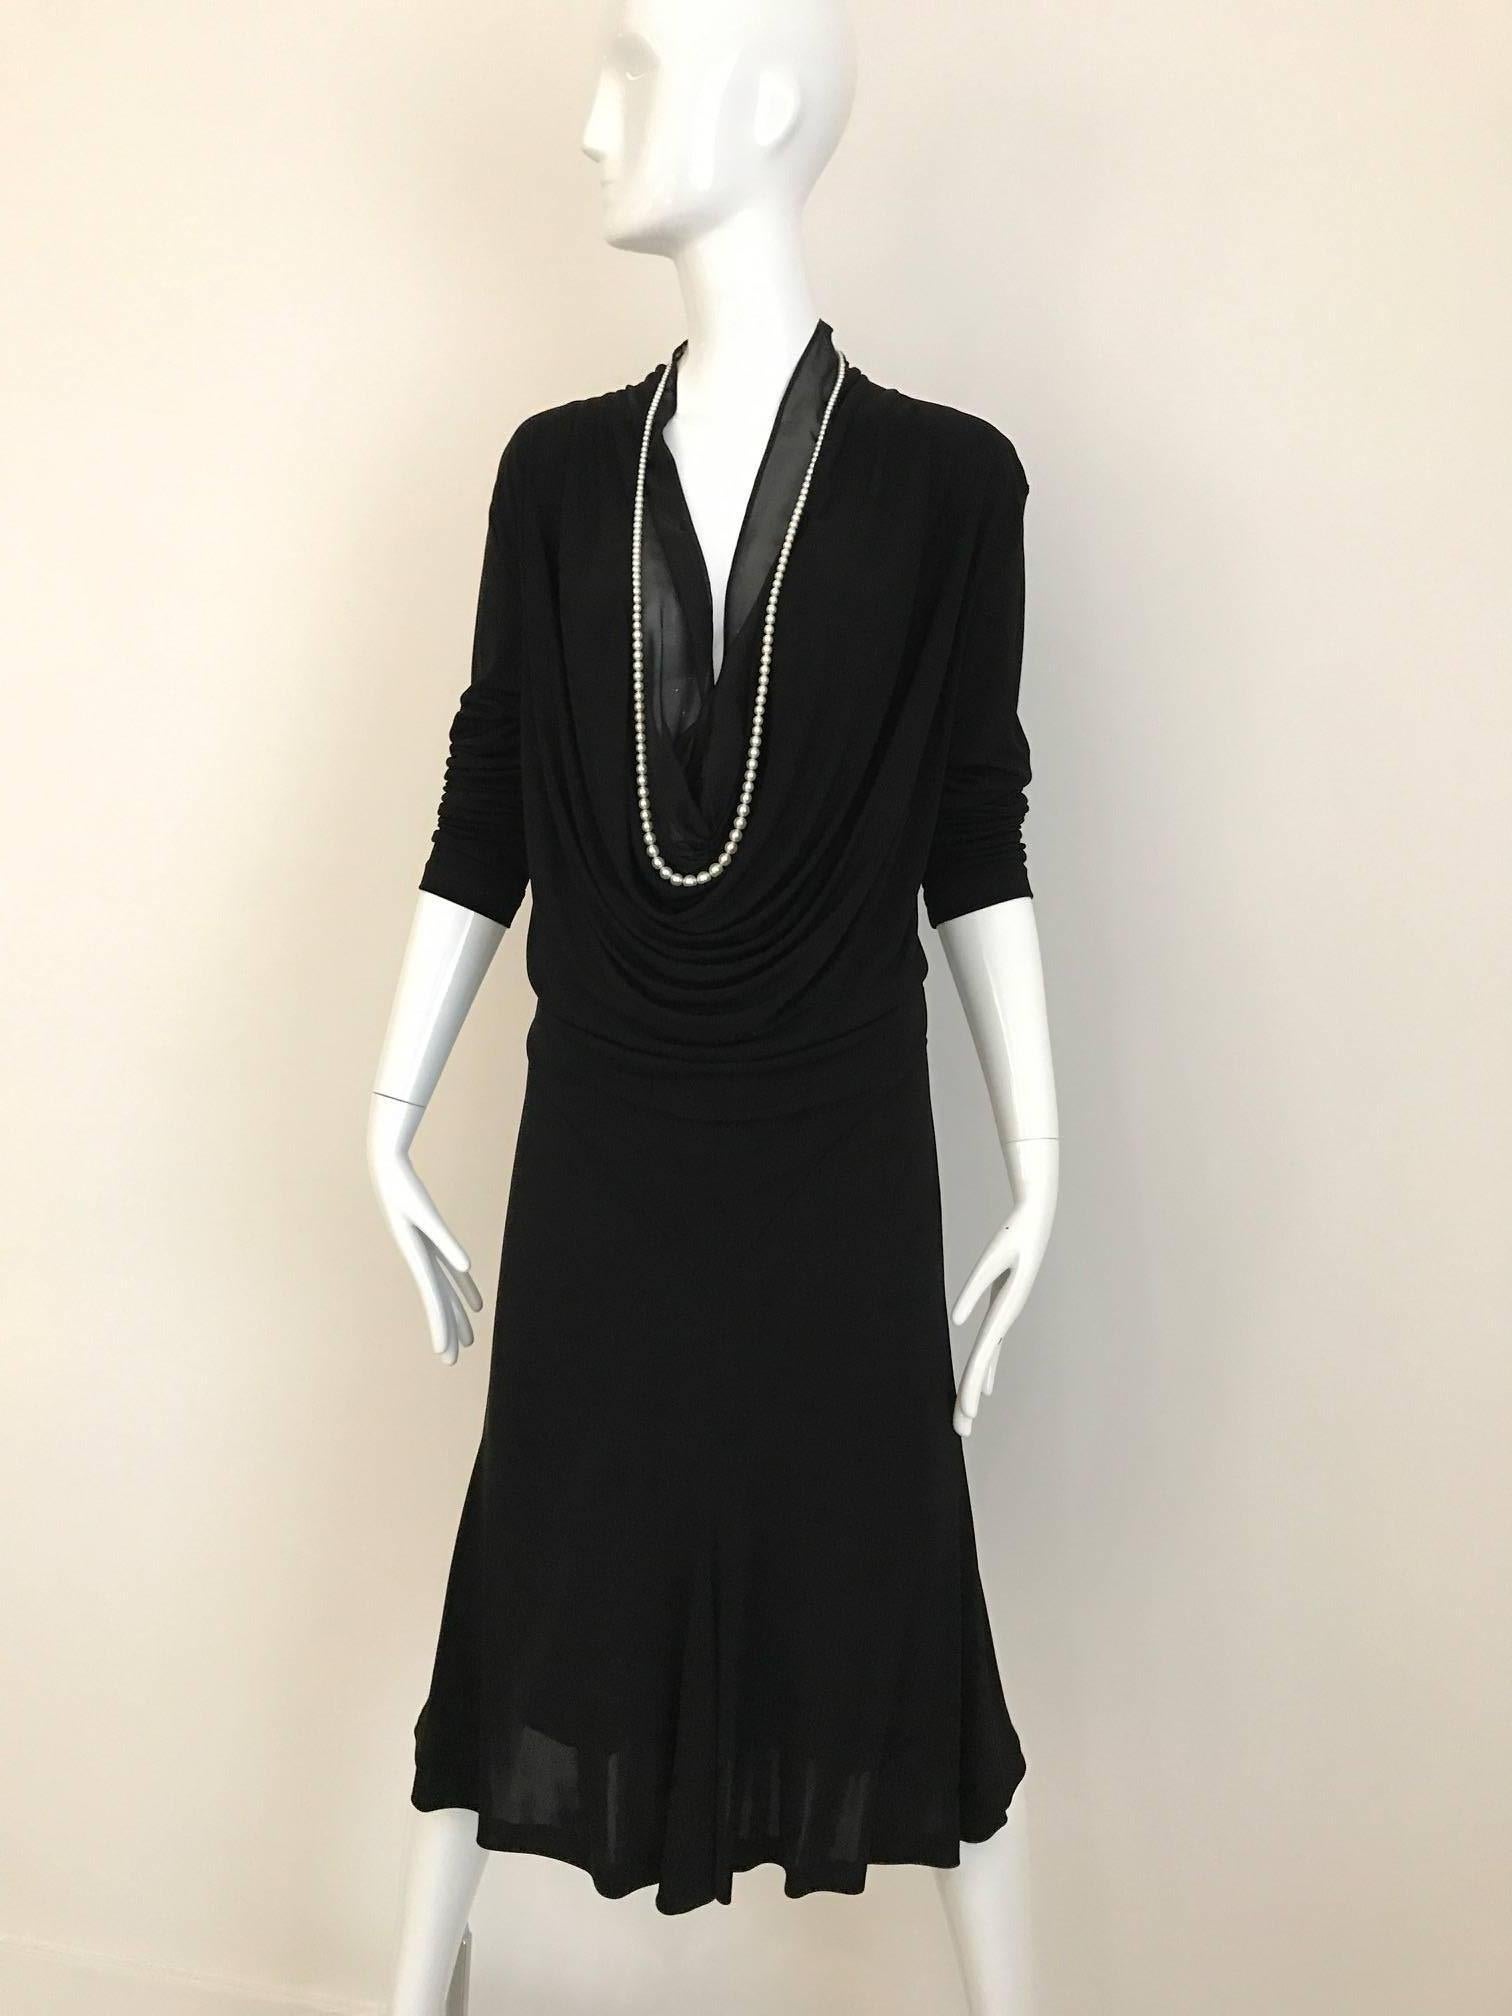 1990s Jean Paul Gaultier black jersey plunging neckline dress with pearl collar. Dress has sheer silk chiffon as a lining on the bust area (for modest coverage) 
Bust 42 ( blousy style) Waist: 32 inch/  Hip: 39 inch/  Dress Length: 45 inch
Fit